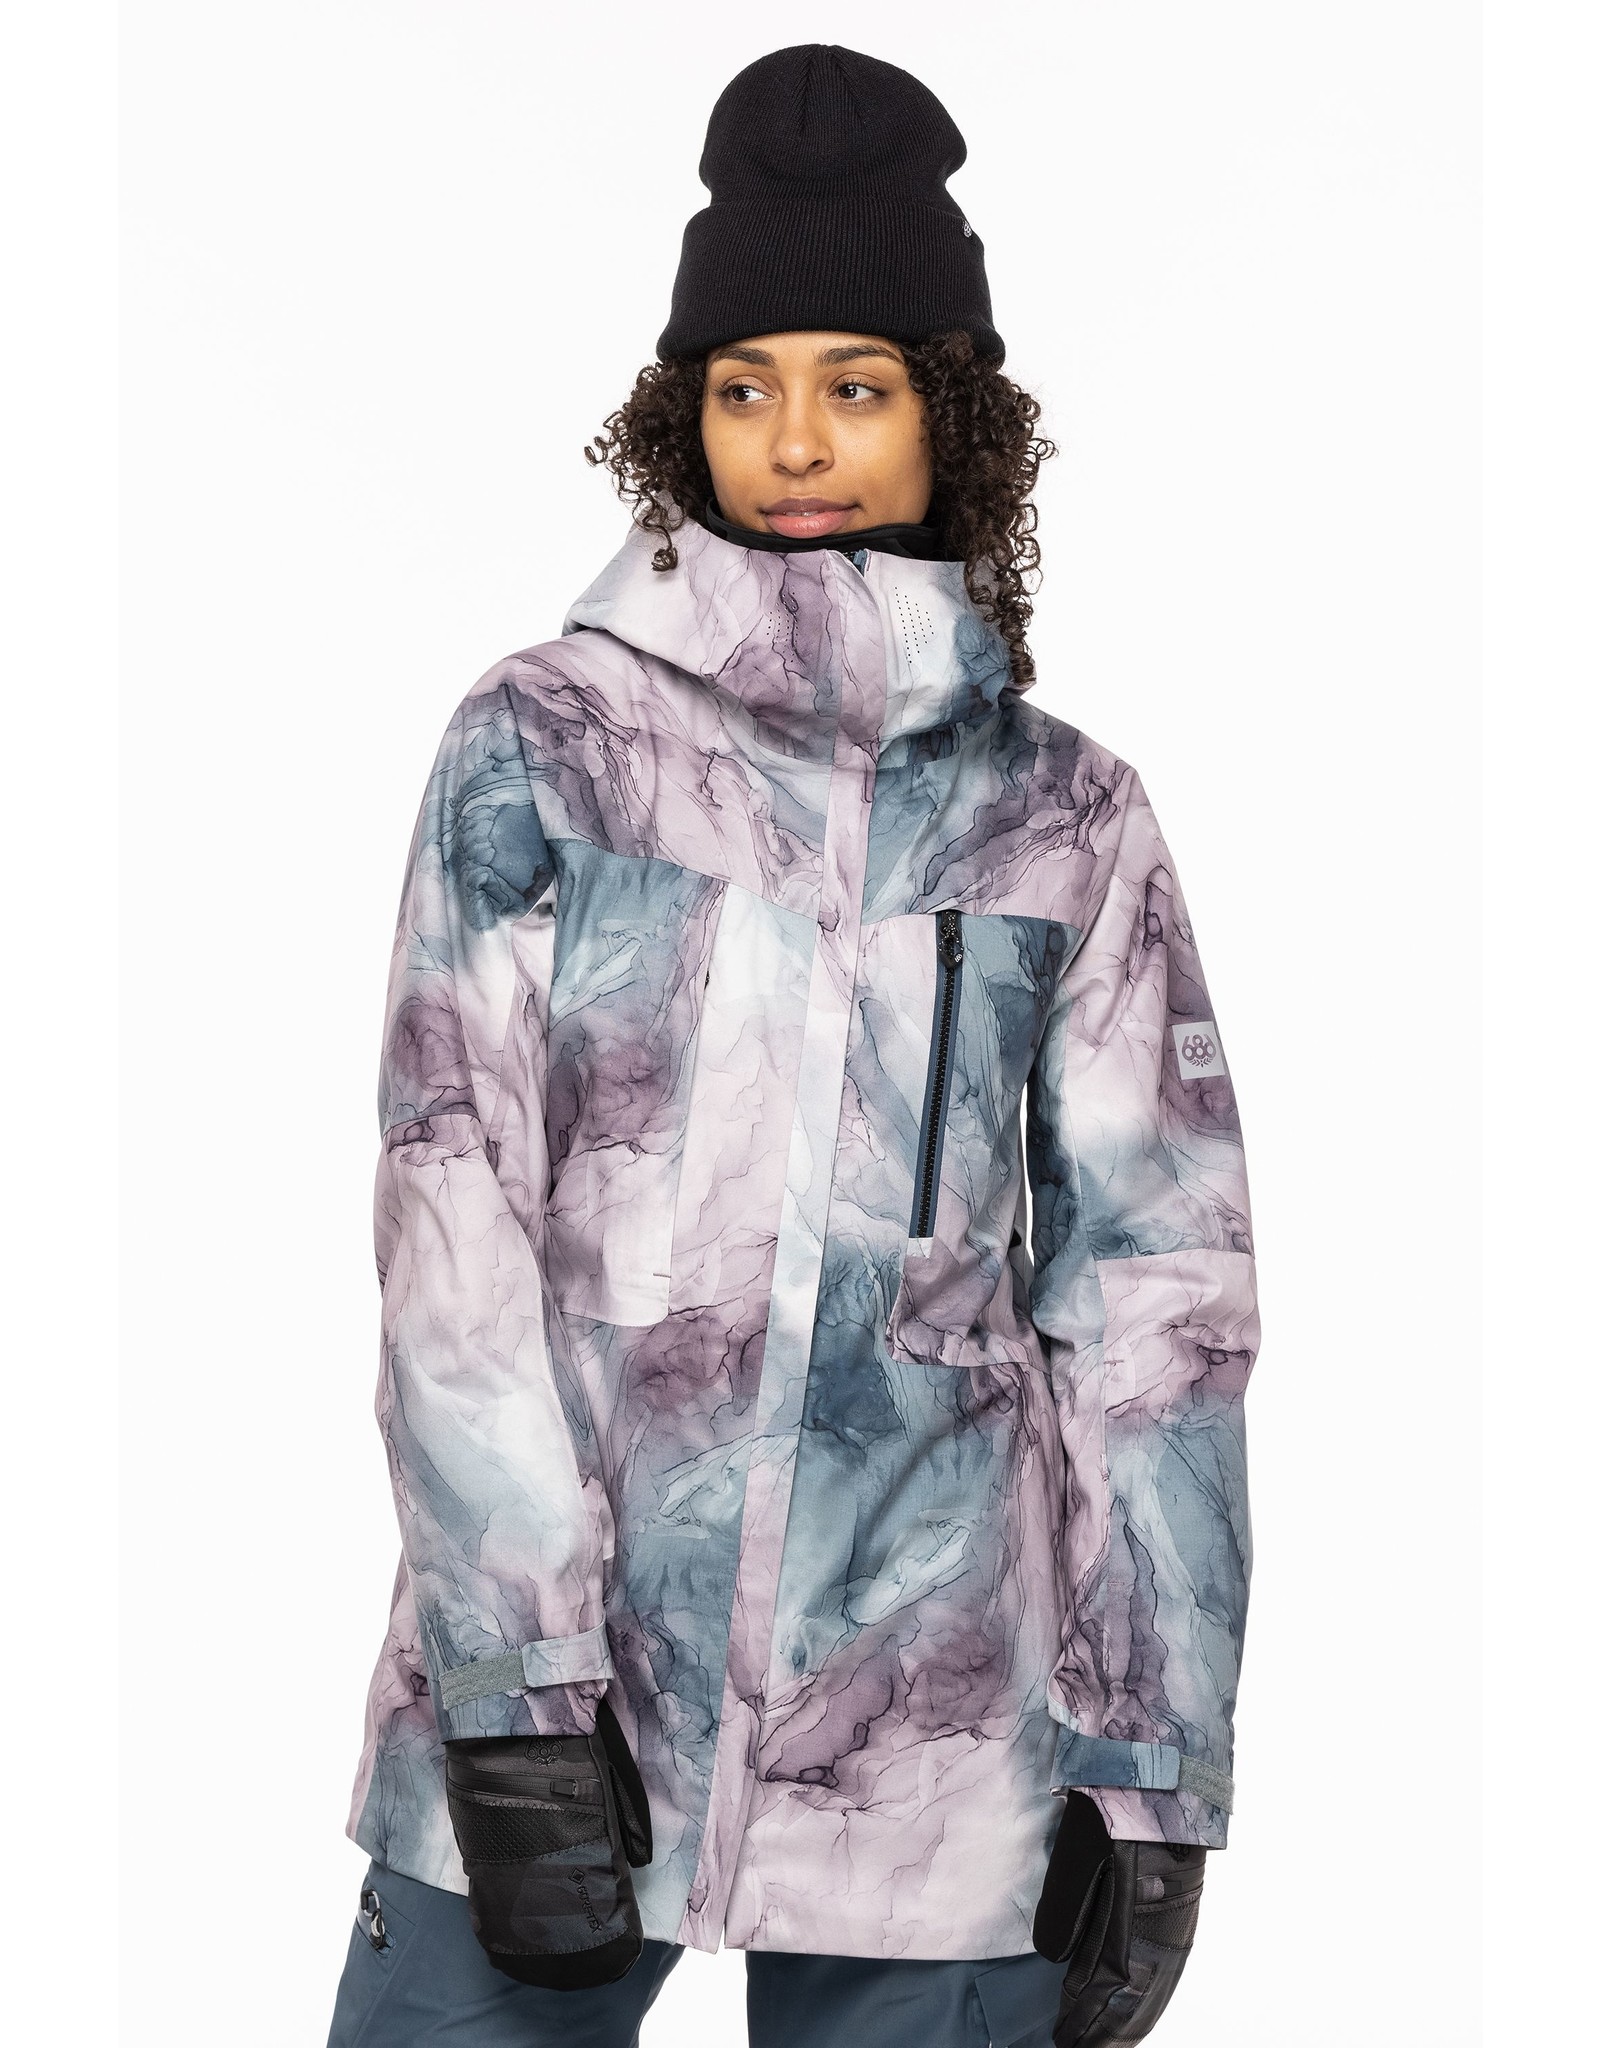 686 OUTERWEAR 686 - WOMENS MANTRA INSULATED JACKET - DUSTY ORCHID MARBLE -